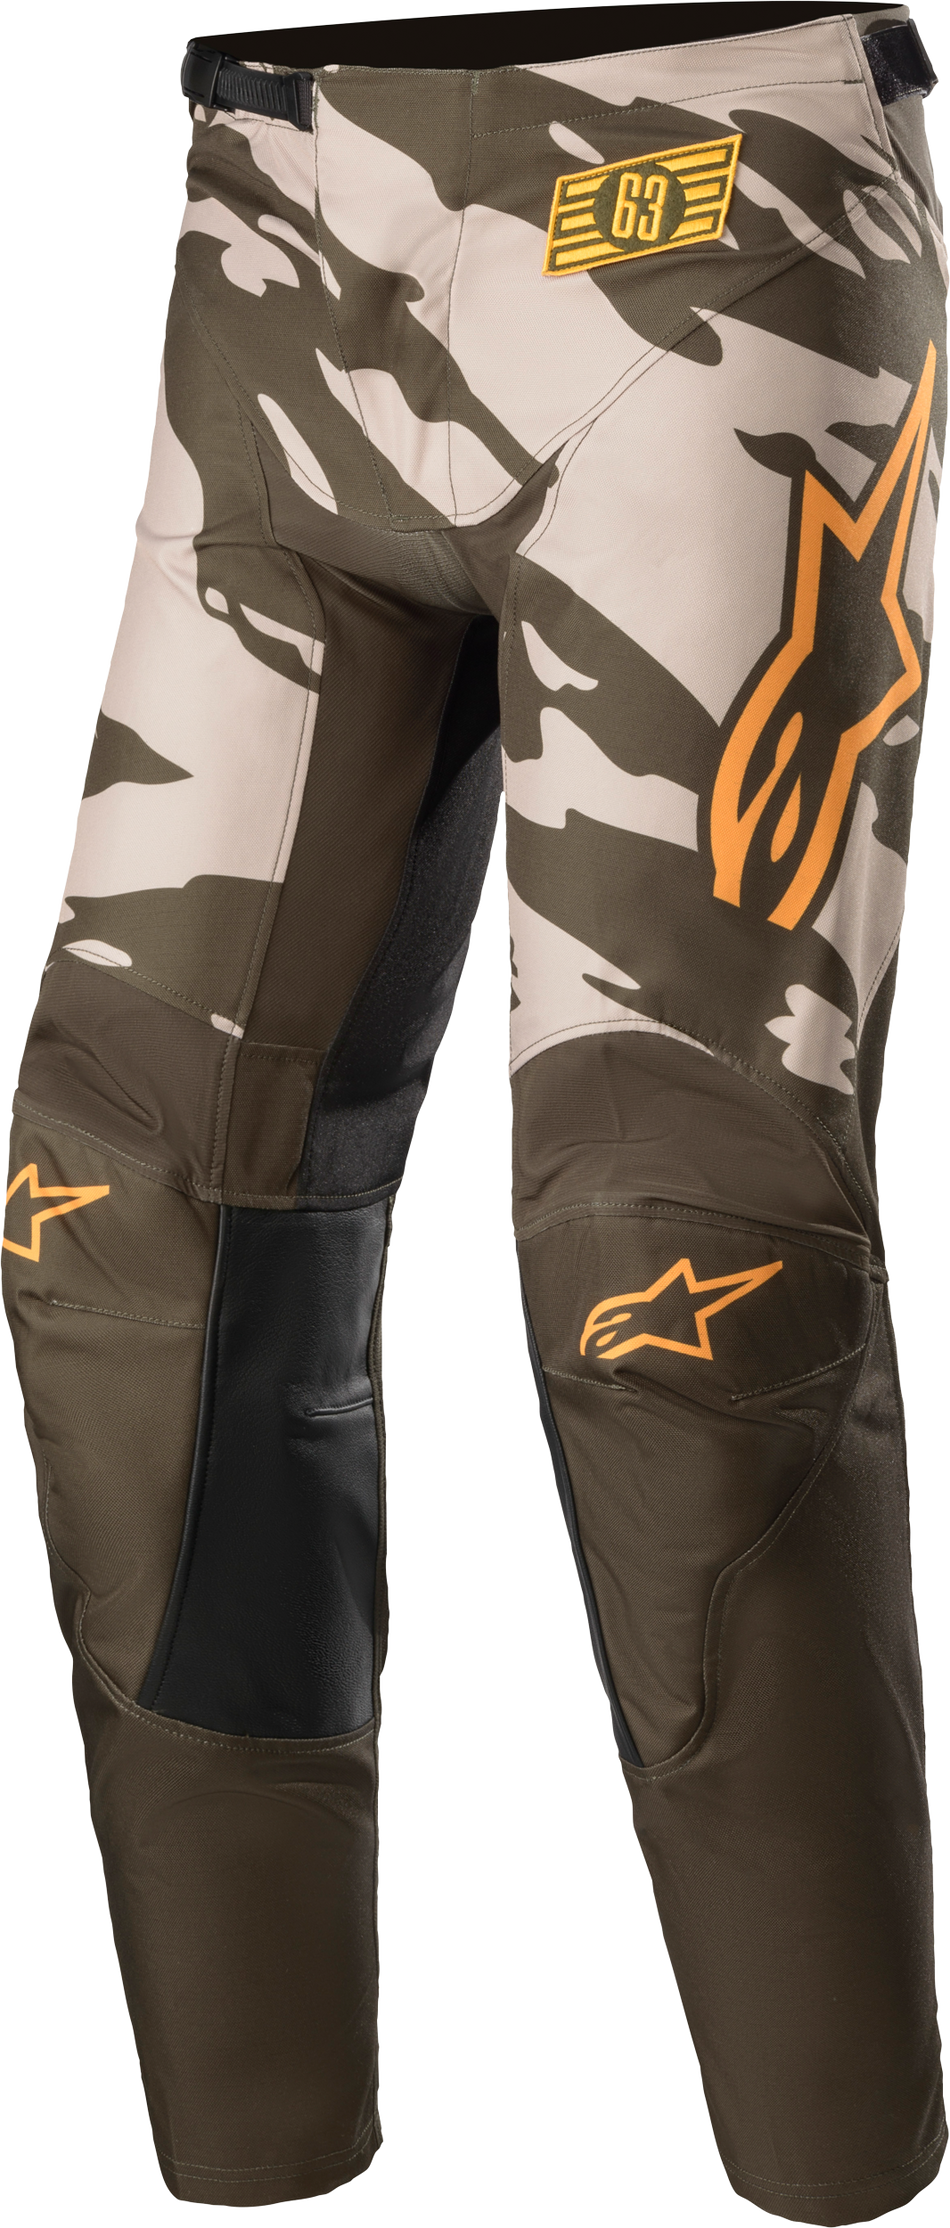 ALPINESTARS Youth Racer Tactical Pants Mltry/Sand Camo/Tange Sz 24 3741222-6840-24